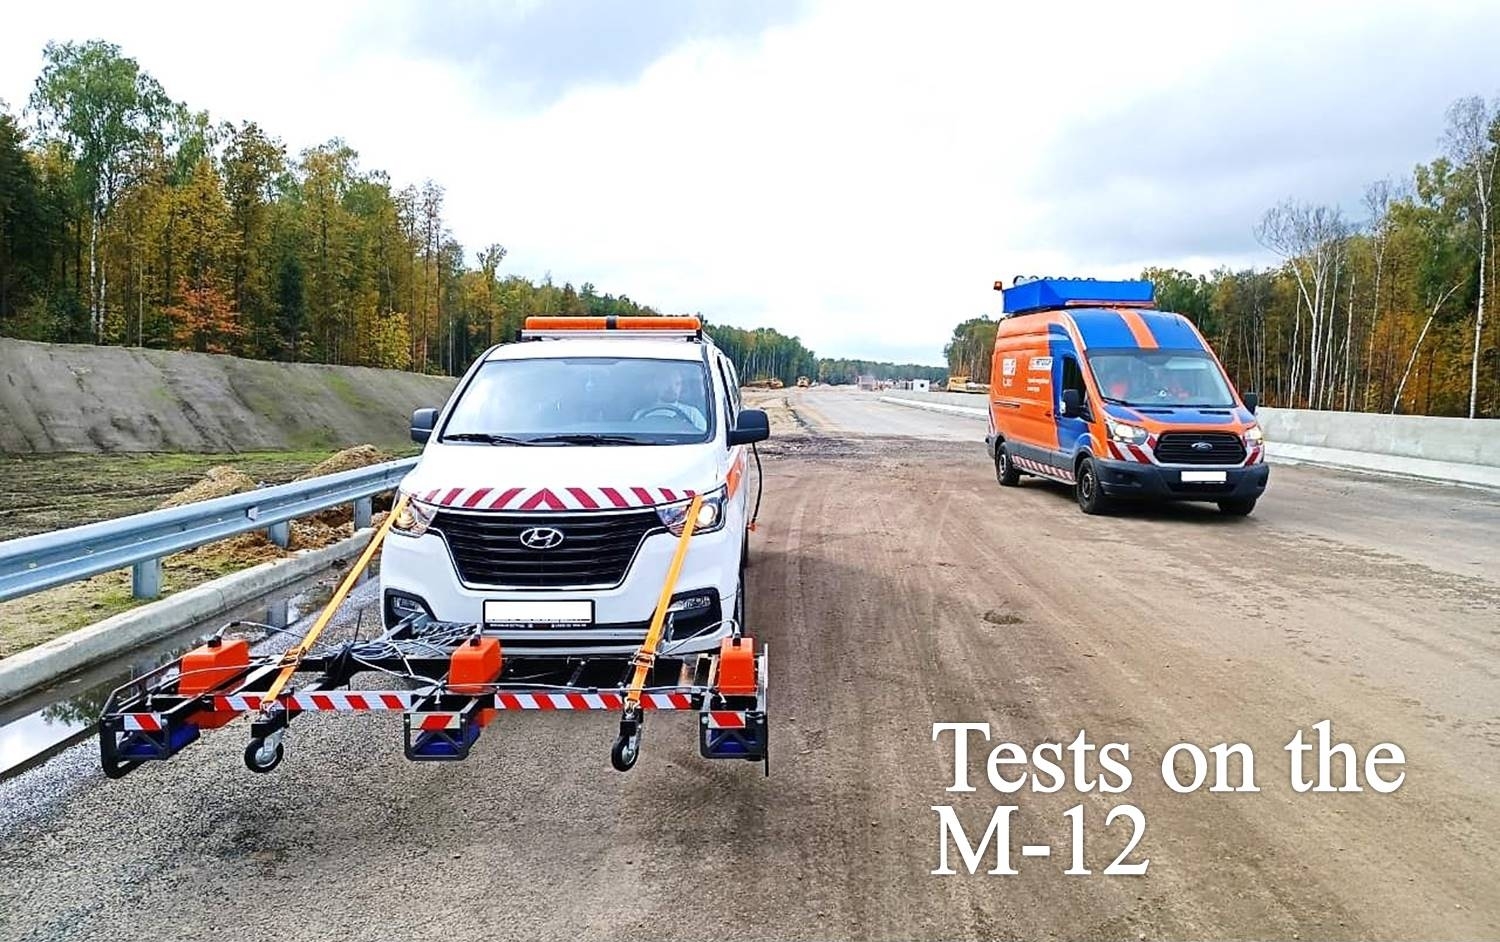 Tests on the M-12